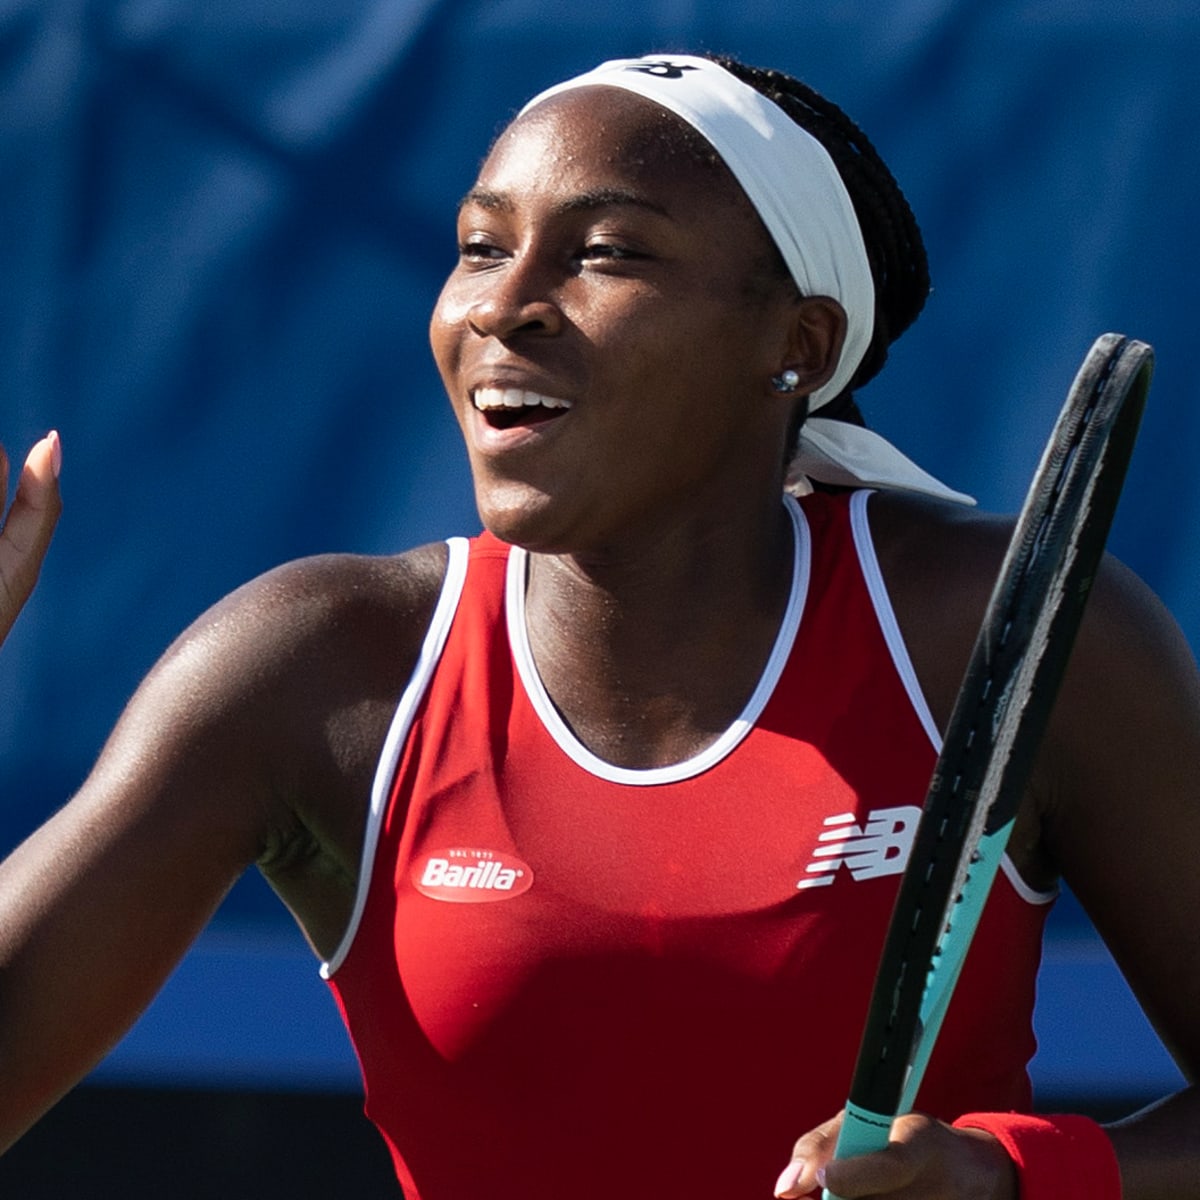 Coco Gauff leads the charge in quest for next American major champ